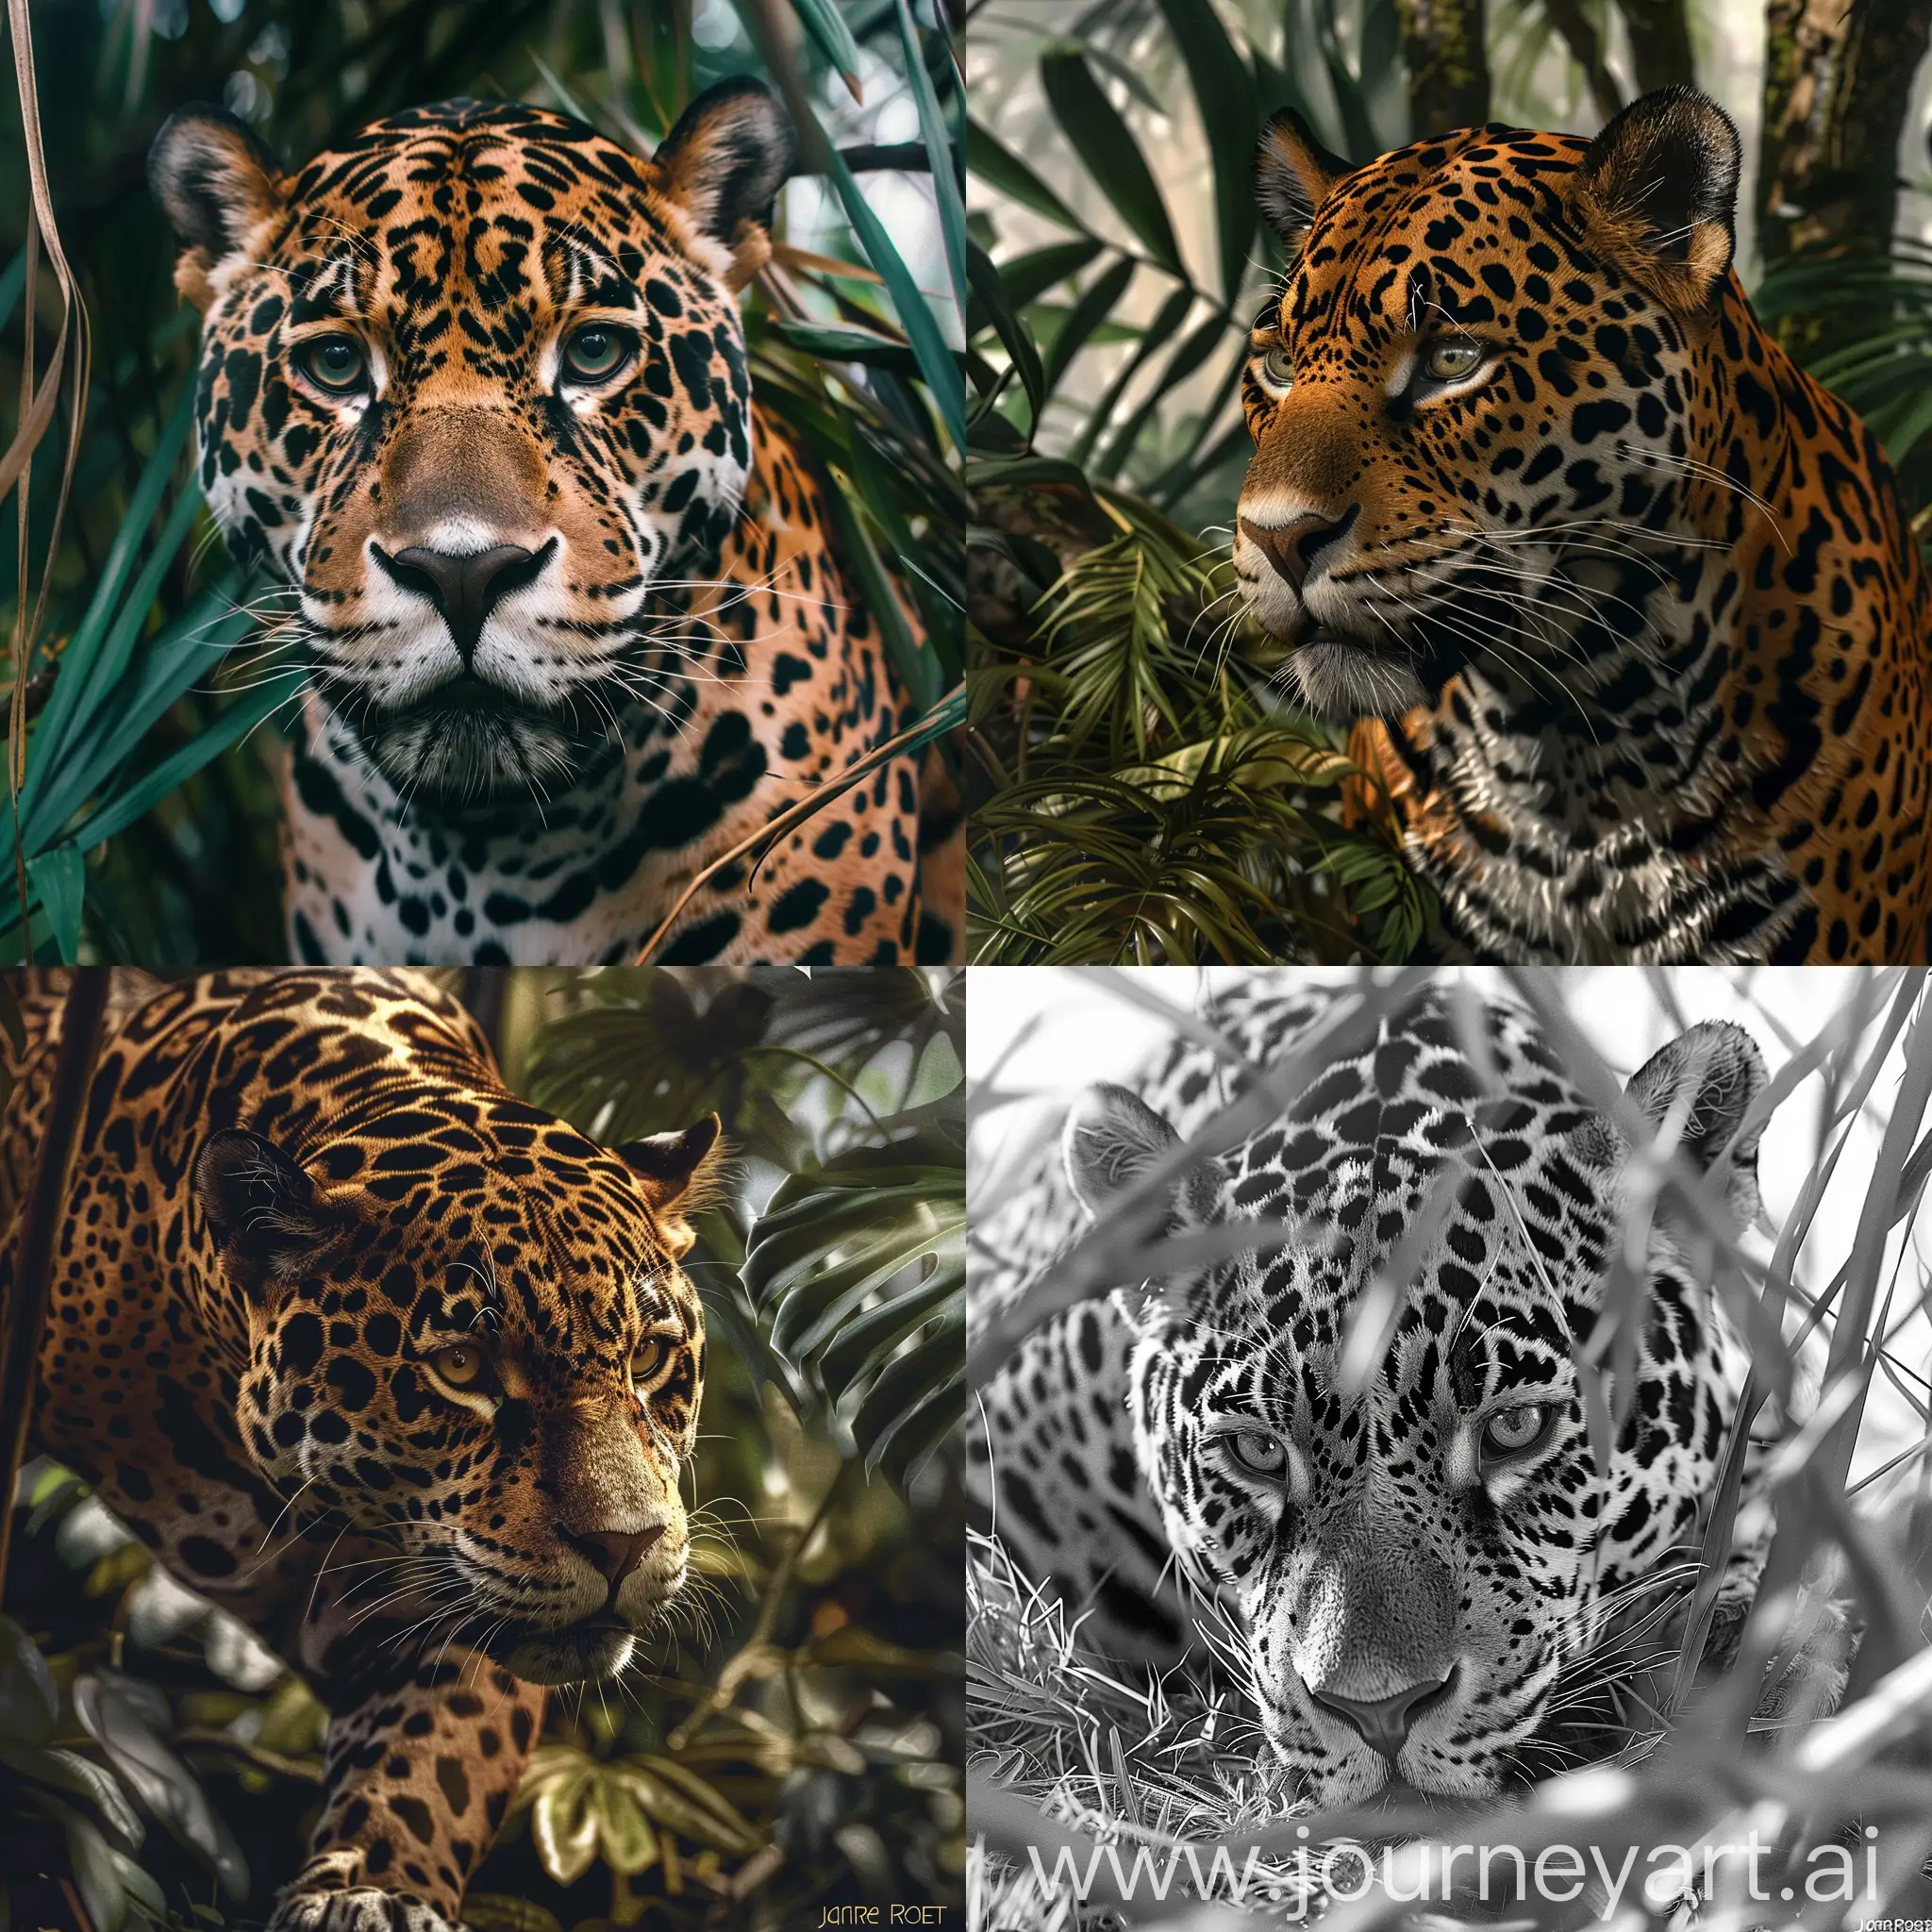 sexy female dragonborn| centered| key visual| intricate| highly detailed| breathtaking beauty| precise lineart| vibrant| comprehensive cinematic| Carne Griffiths| Conrad Roset ,hyper-realistic photo, jaguar in the wild, close-up, in the style of nature photography, photo-realistic, shot on a Sony A7III, 